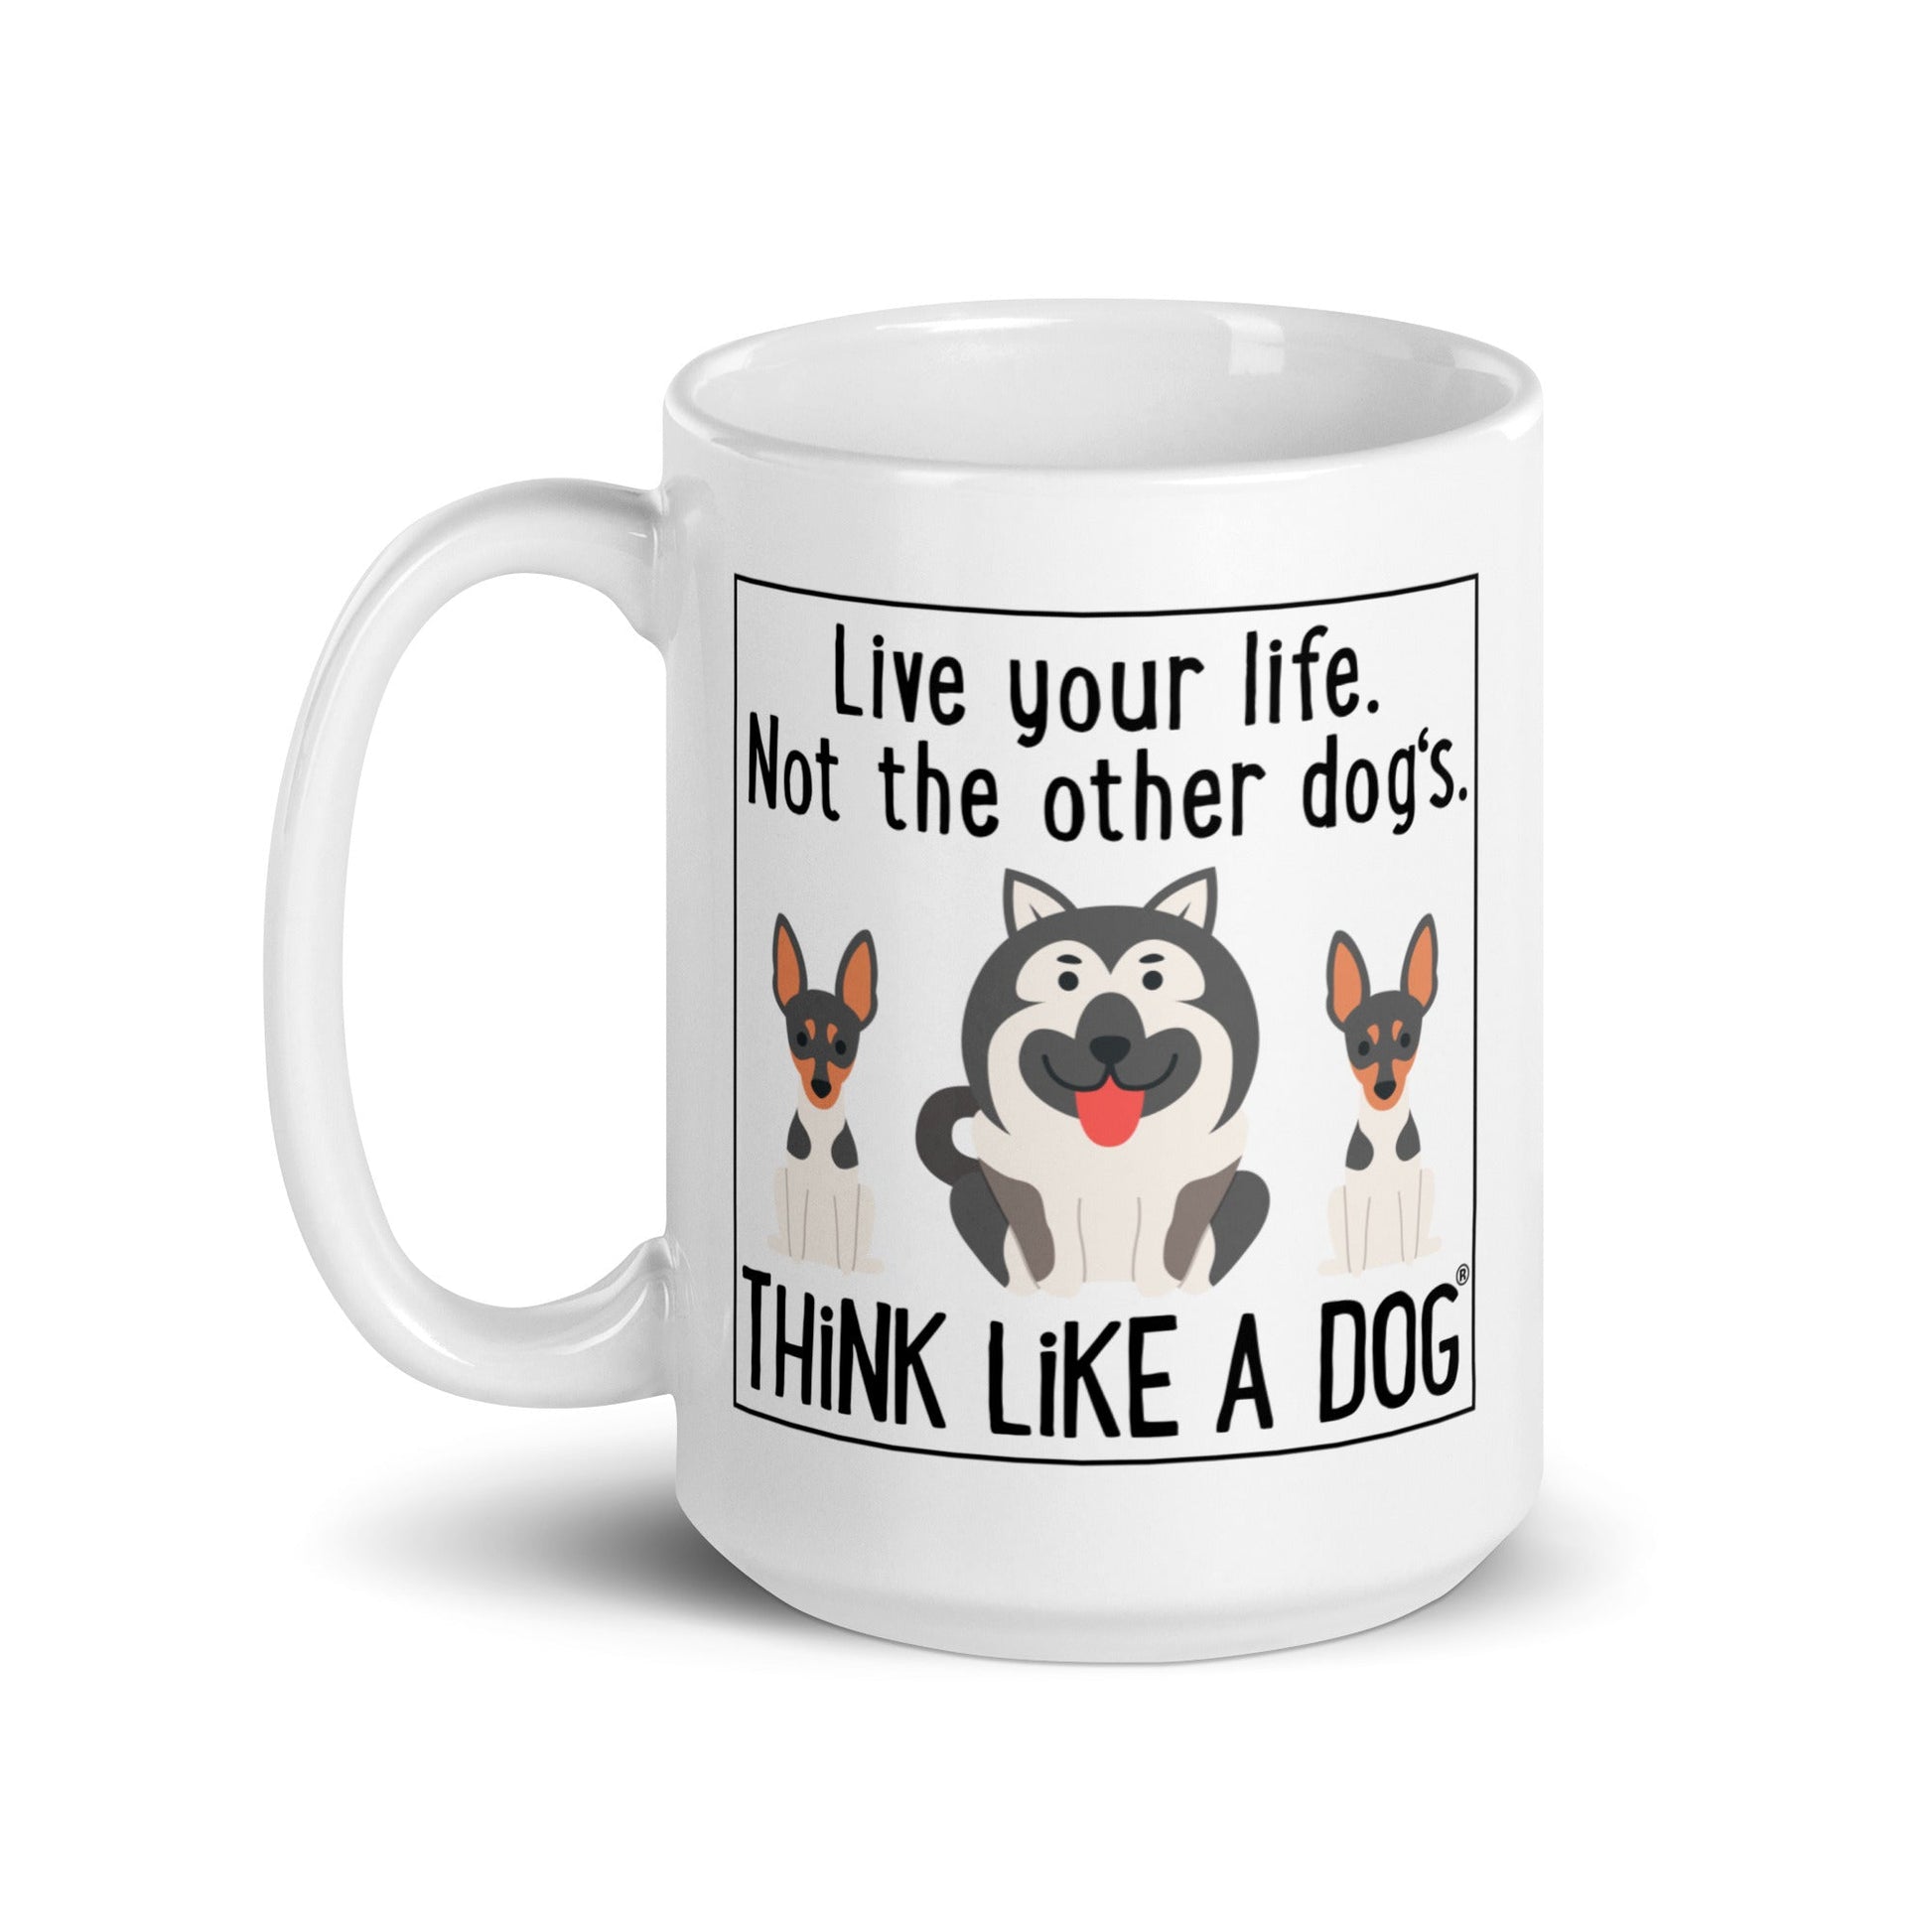 A THiNK LiKE A DOG® white glossy mug with the text "live your life, not the other dog's. think like a dog" and illustrations of three cartoon dogs.